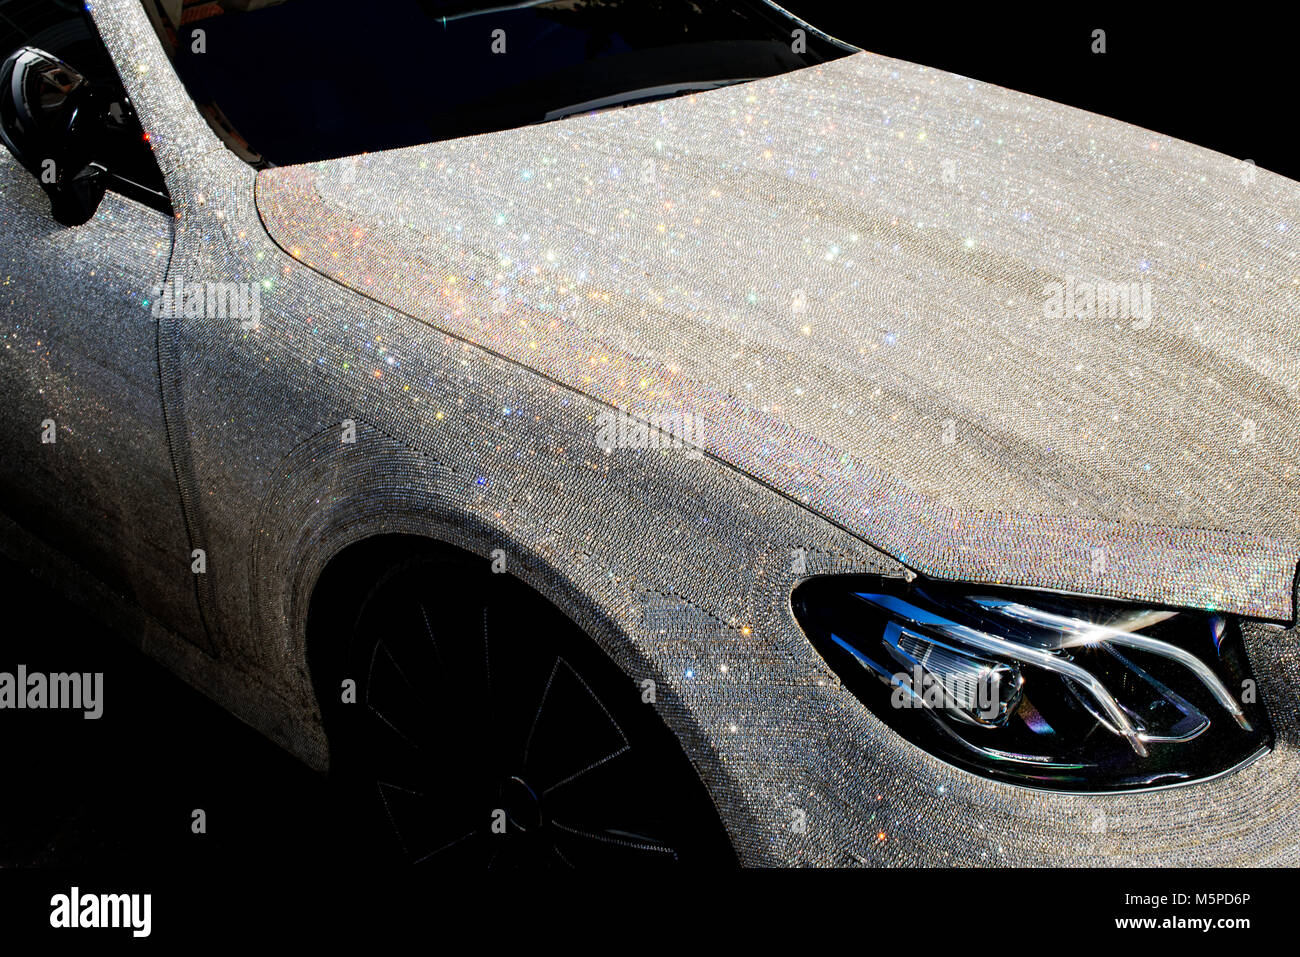 Glitter covered Mercedes in the street Stock Photo - Alamy